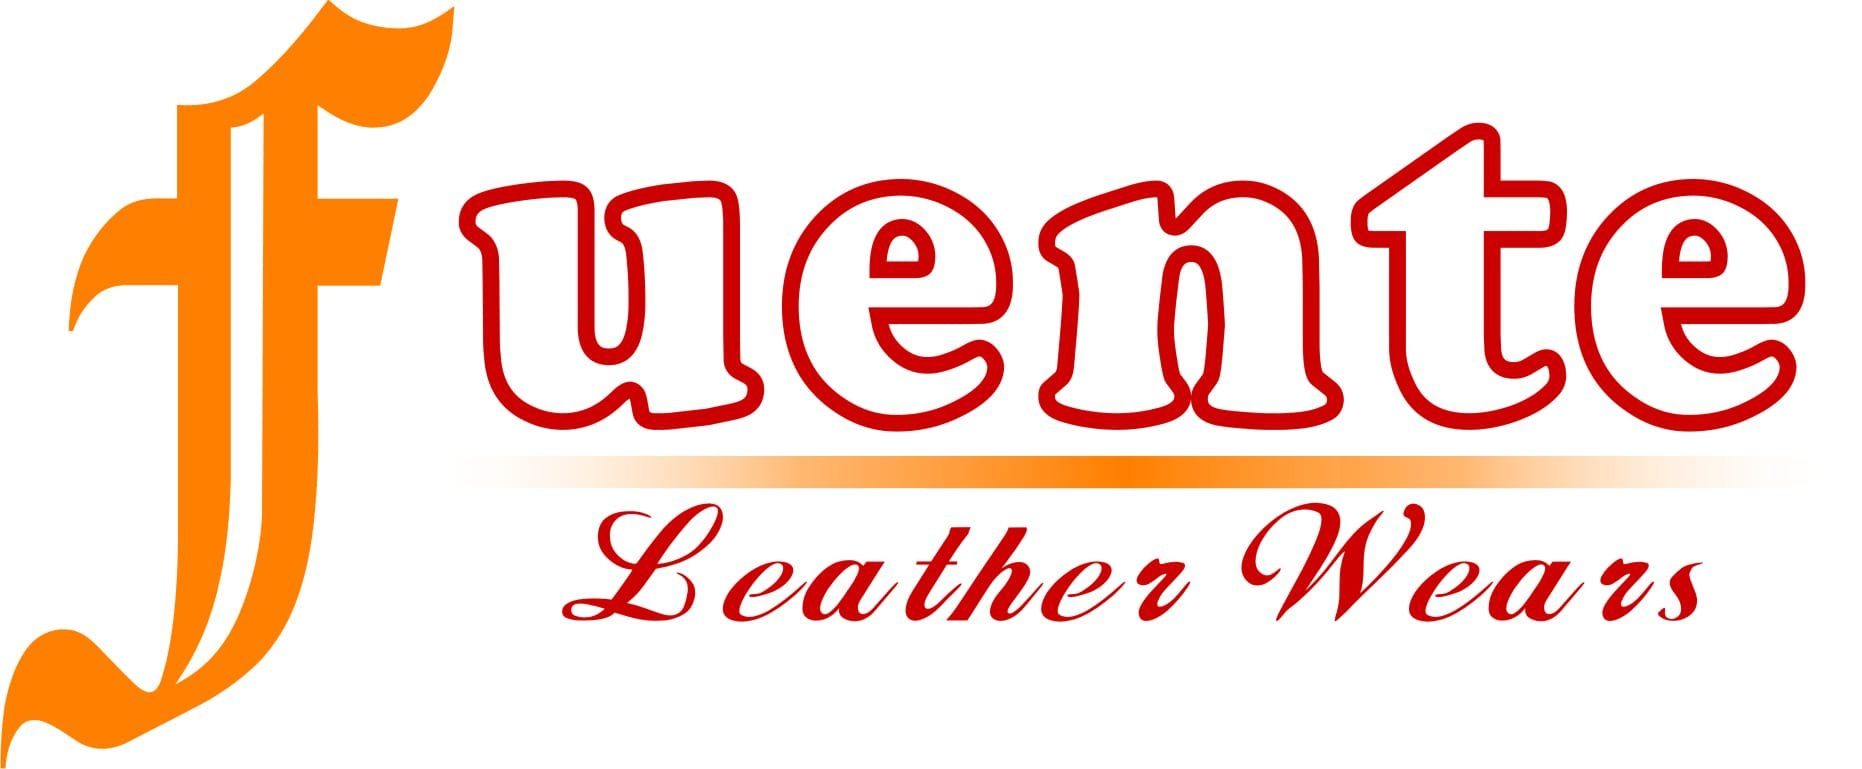 Fuente Leather Wears